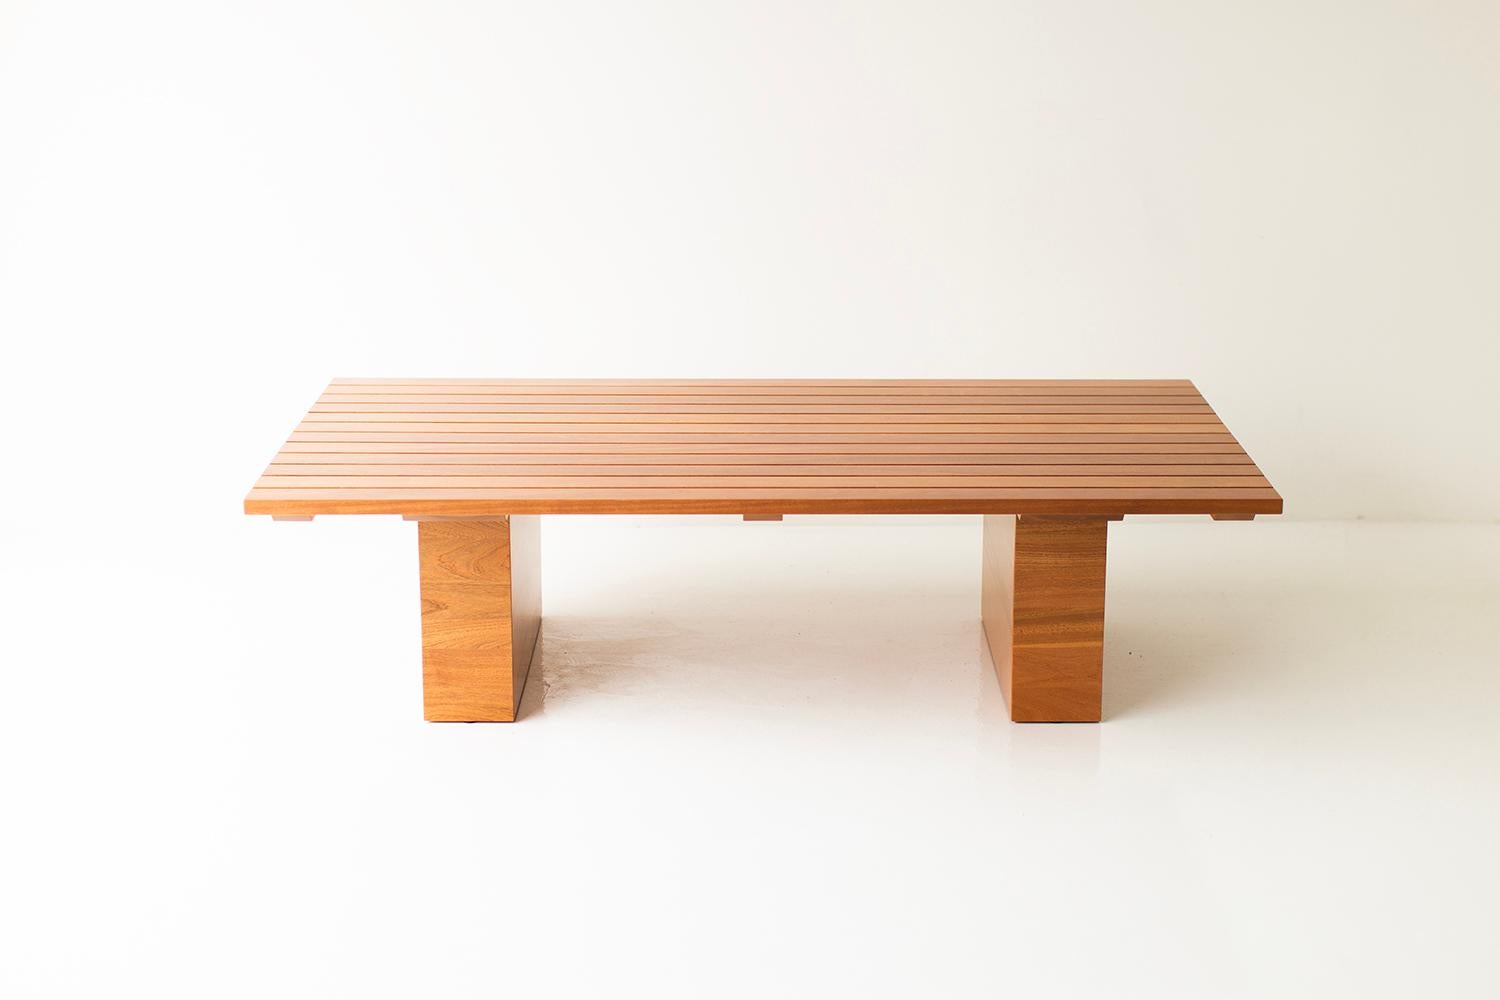 Bertu Coffee Table, Outdoor Wood Coffee Table, Coffee Table, Suelo

This Suelo Outdoor Wood Coffee Table is made in the heart of Ohio with locally sourced Sapele Mahogany. This silhouette is simple, modern, and sleek and pairs amazing with any other